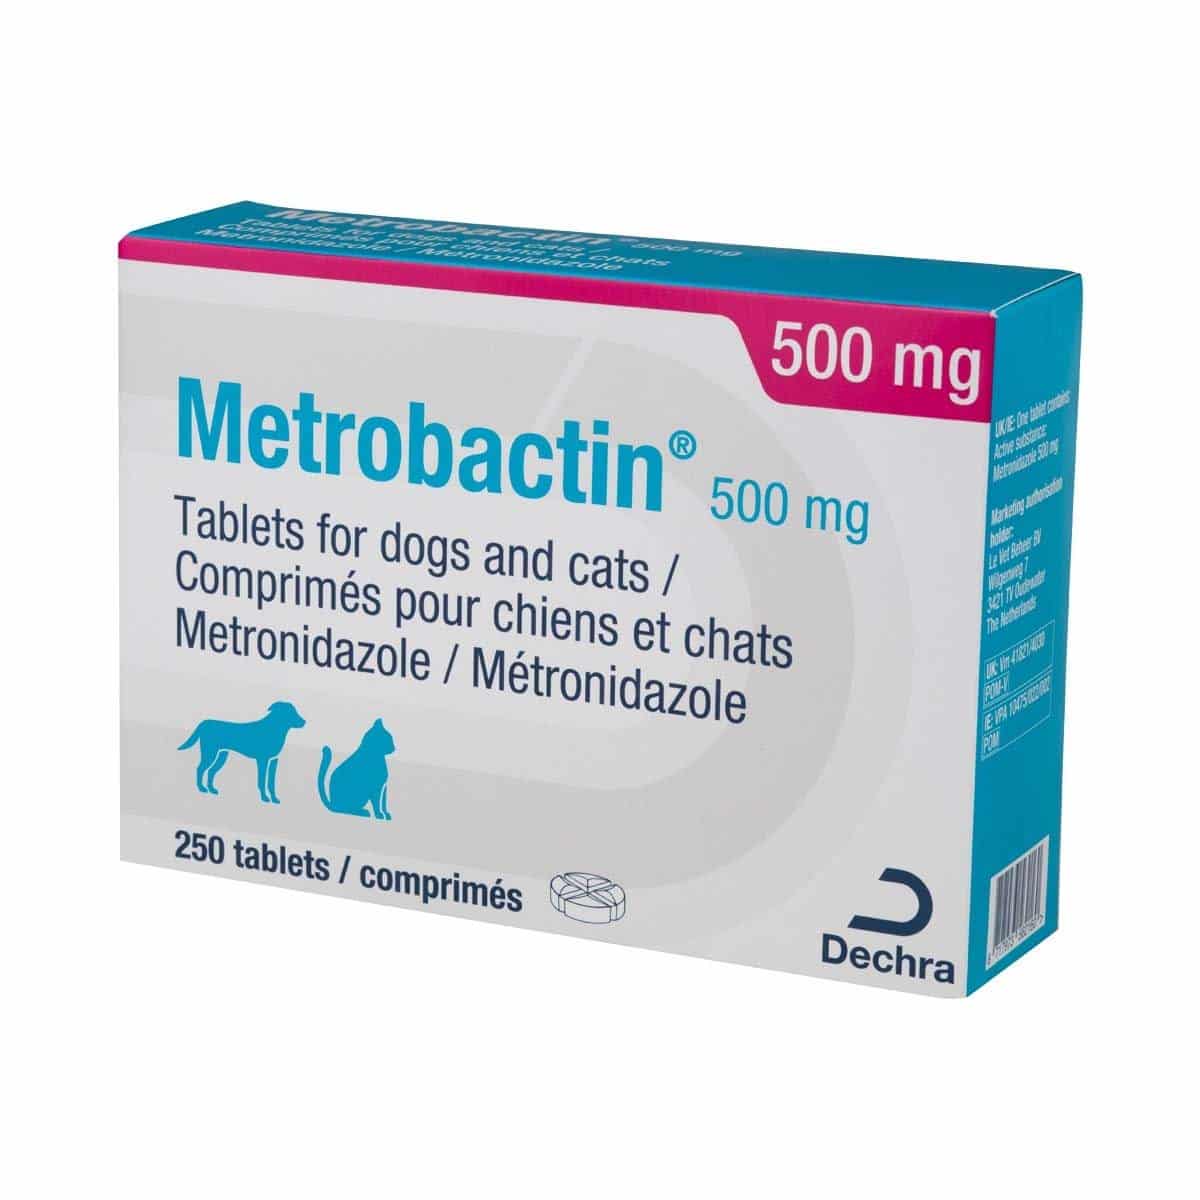 Metronidazole Dosage For Cats